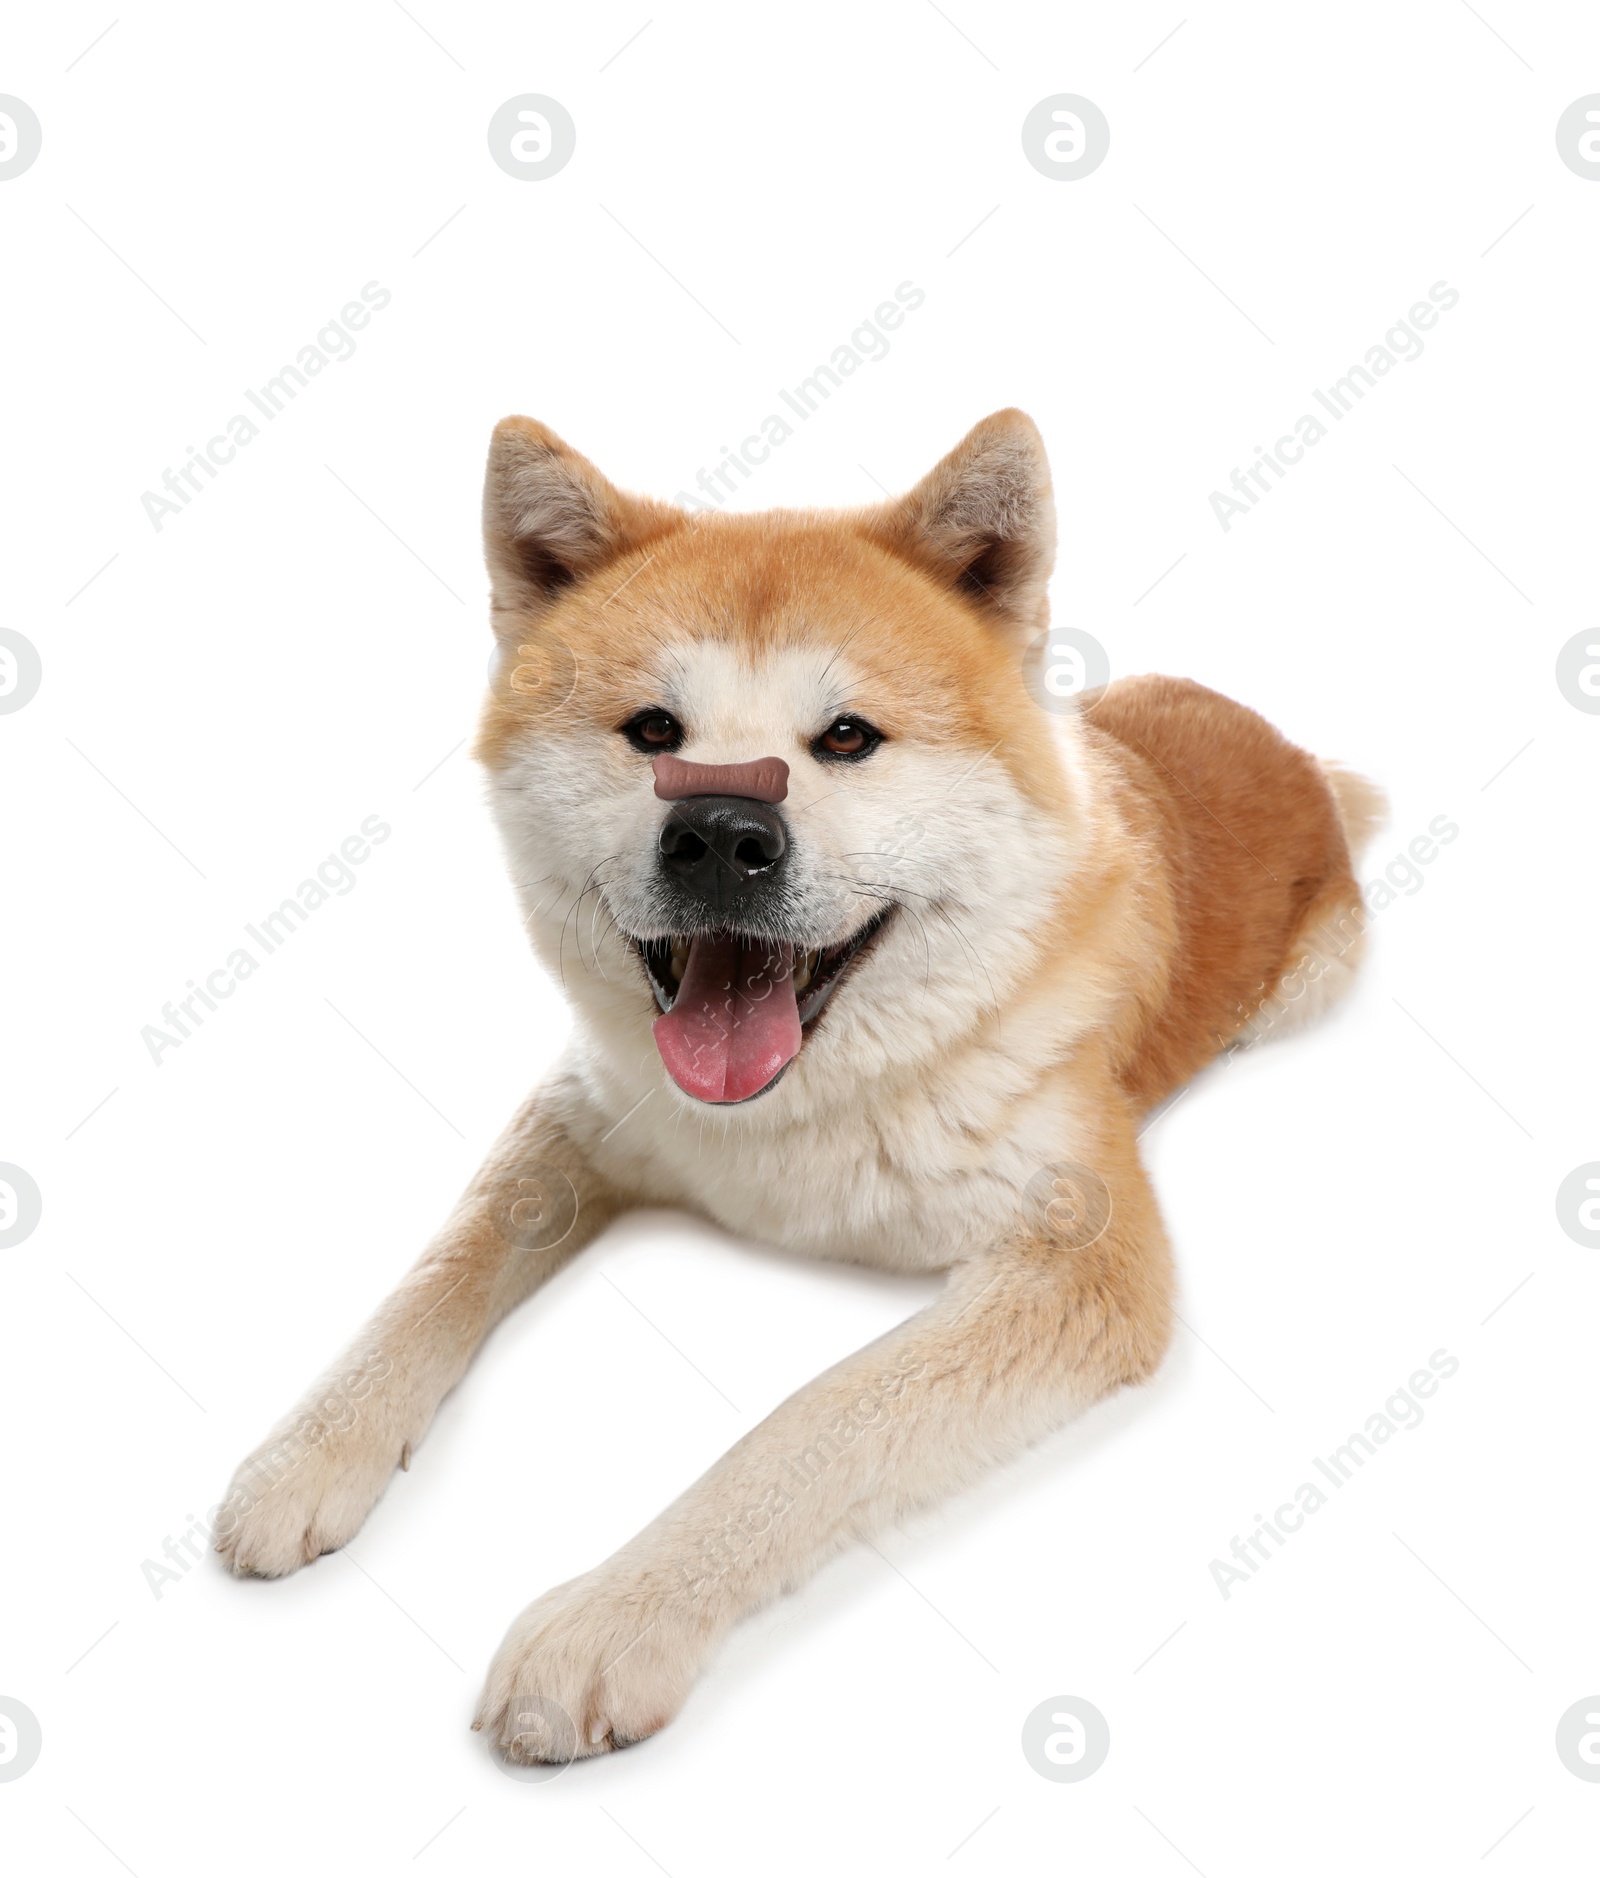 Image of Adorable dog with bone shaped cookie on nose against white background